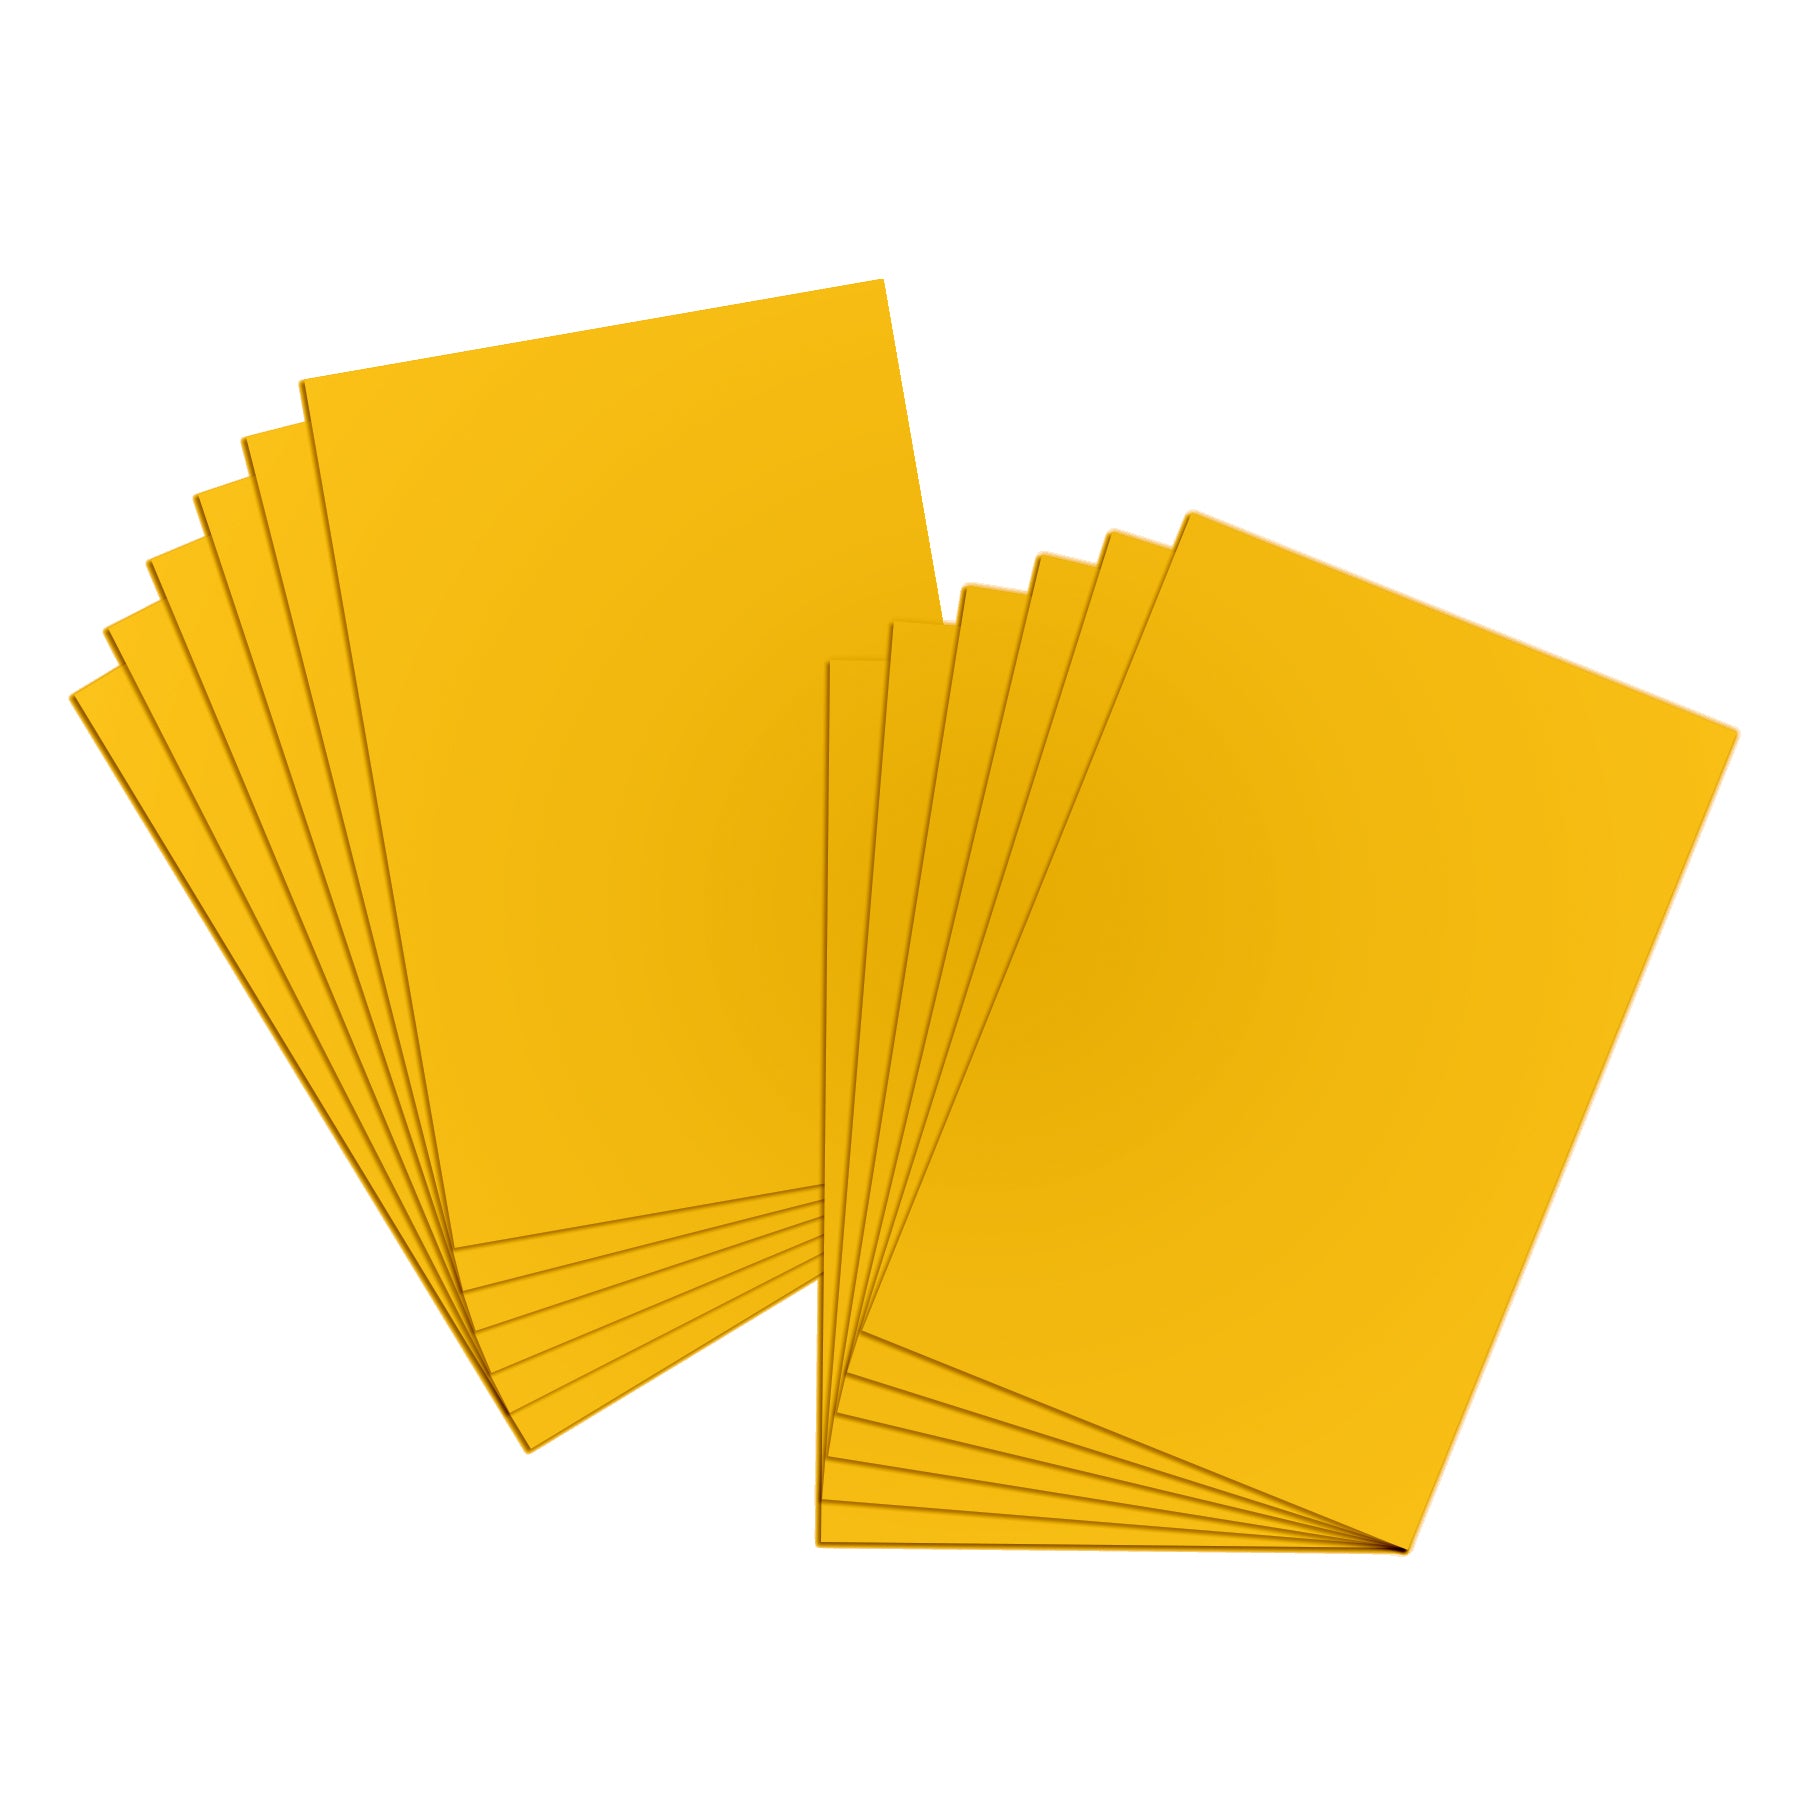 Bazic 22 inch x 28 inch Yellow Poster Board Pack of - 25